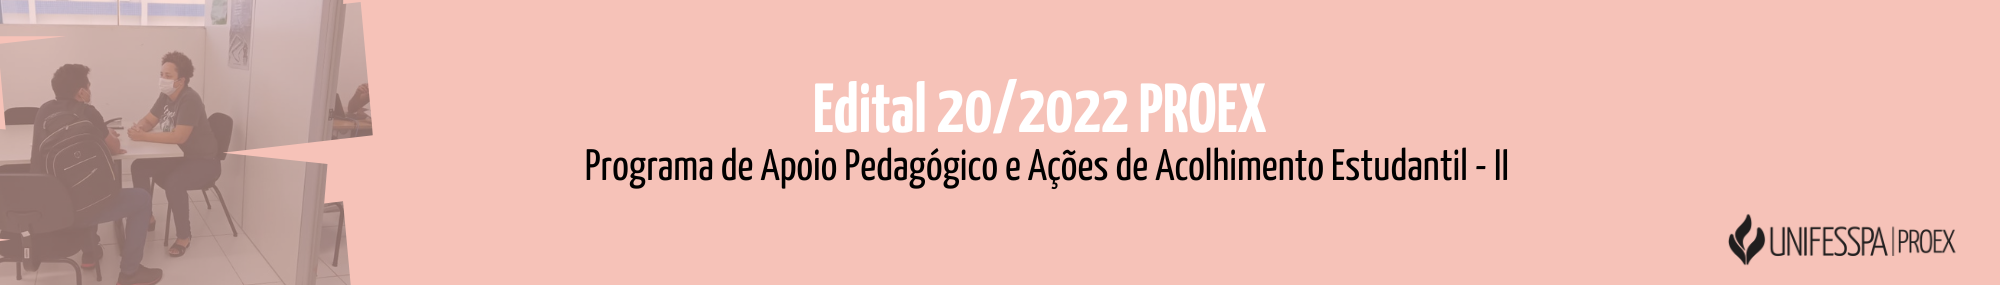 _e-mail - edital 20.2022.png